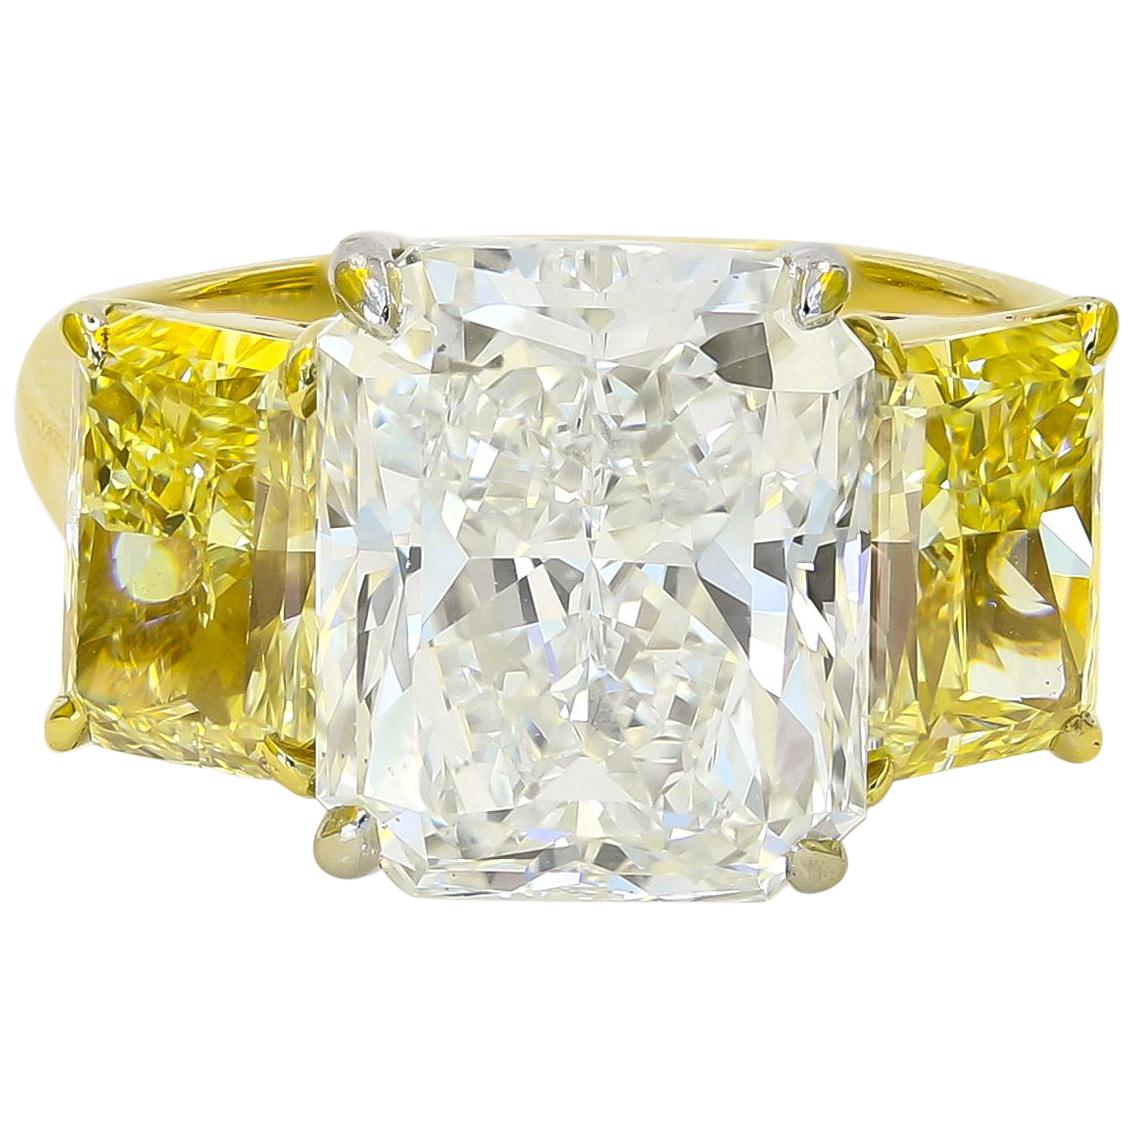 GIA Certified 6.00cts. Radiant Cut and Two Fancy Yellow Radiant Cut Diamond Ring